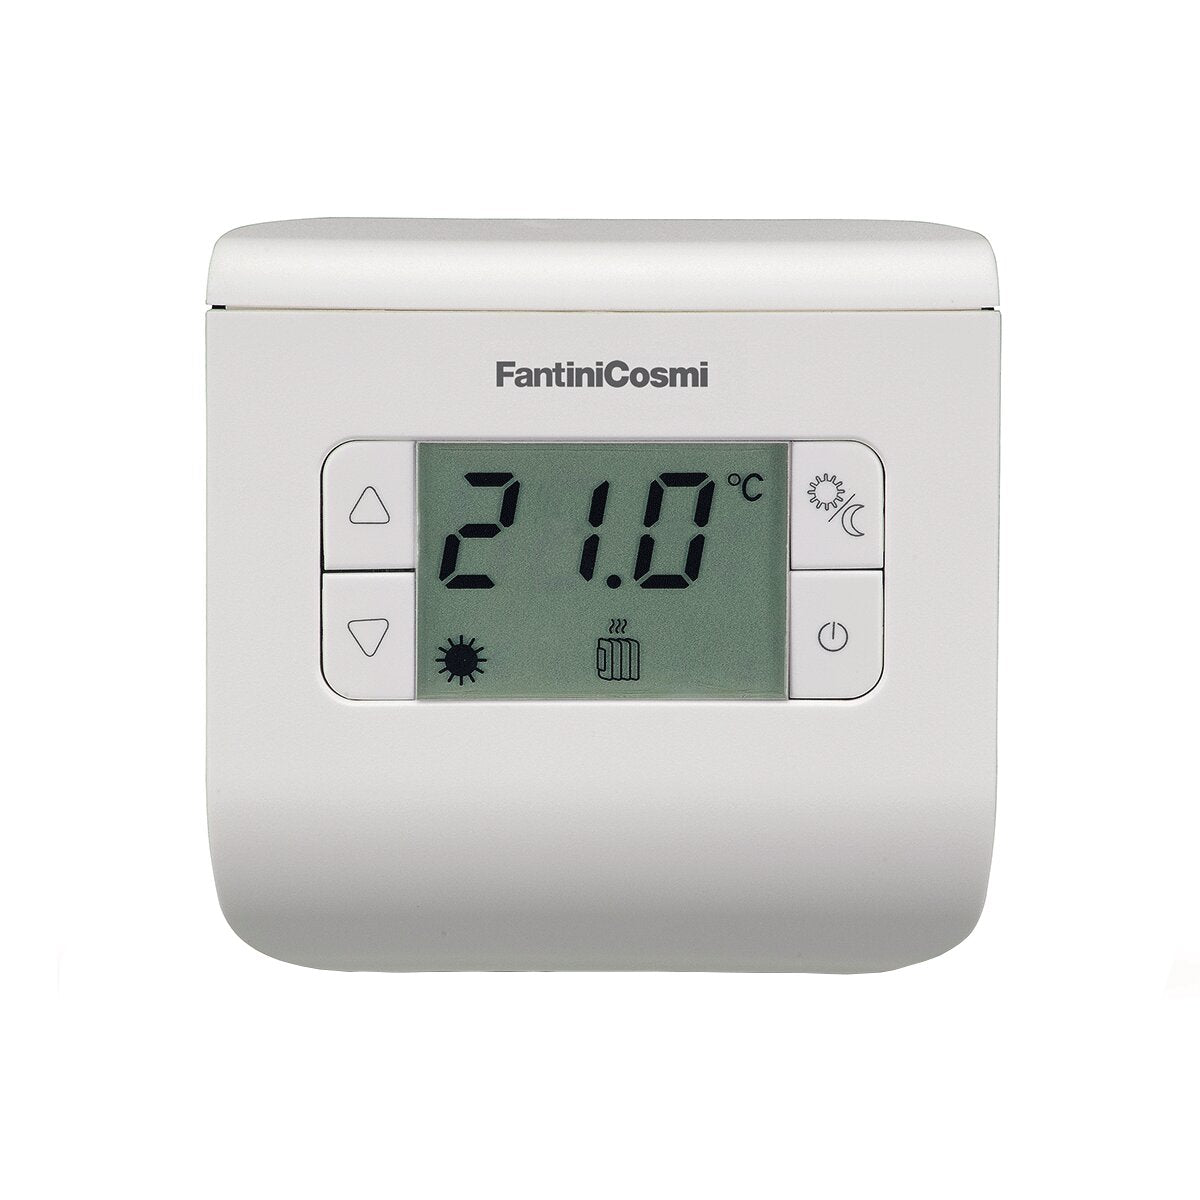 Fantini Cosmi CH110 electronic microprocessor room thermostat